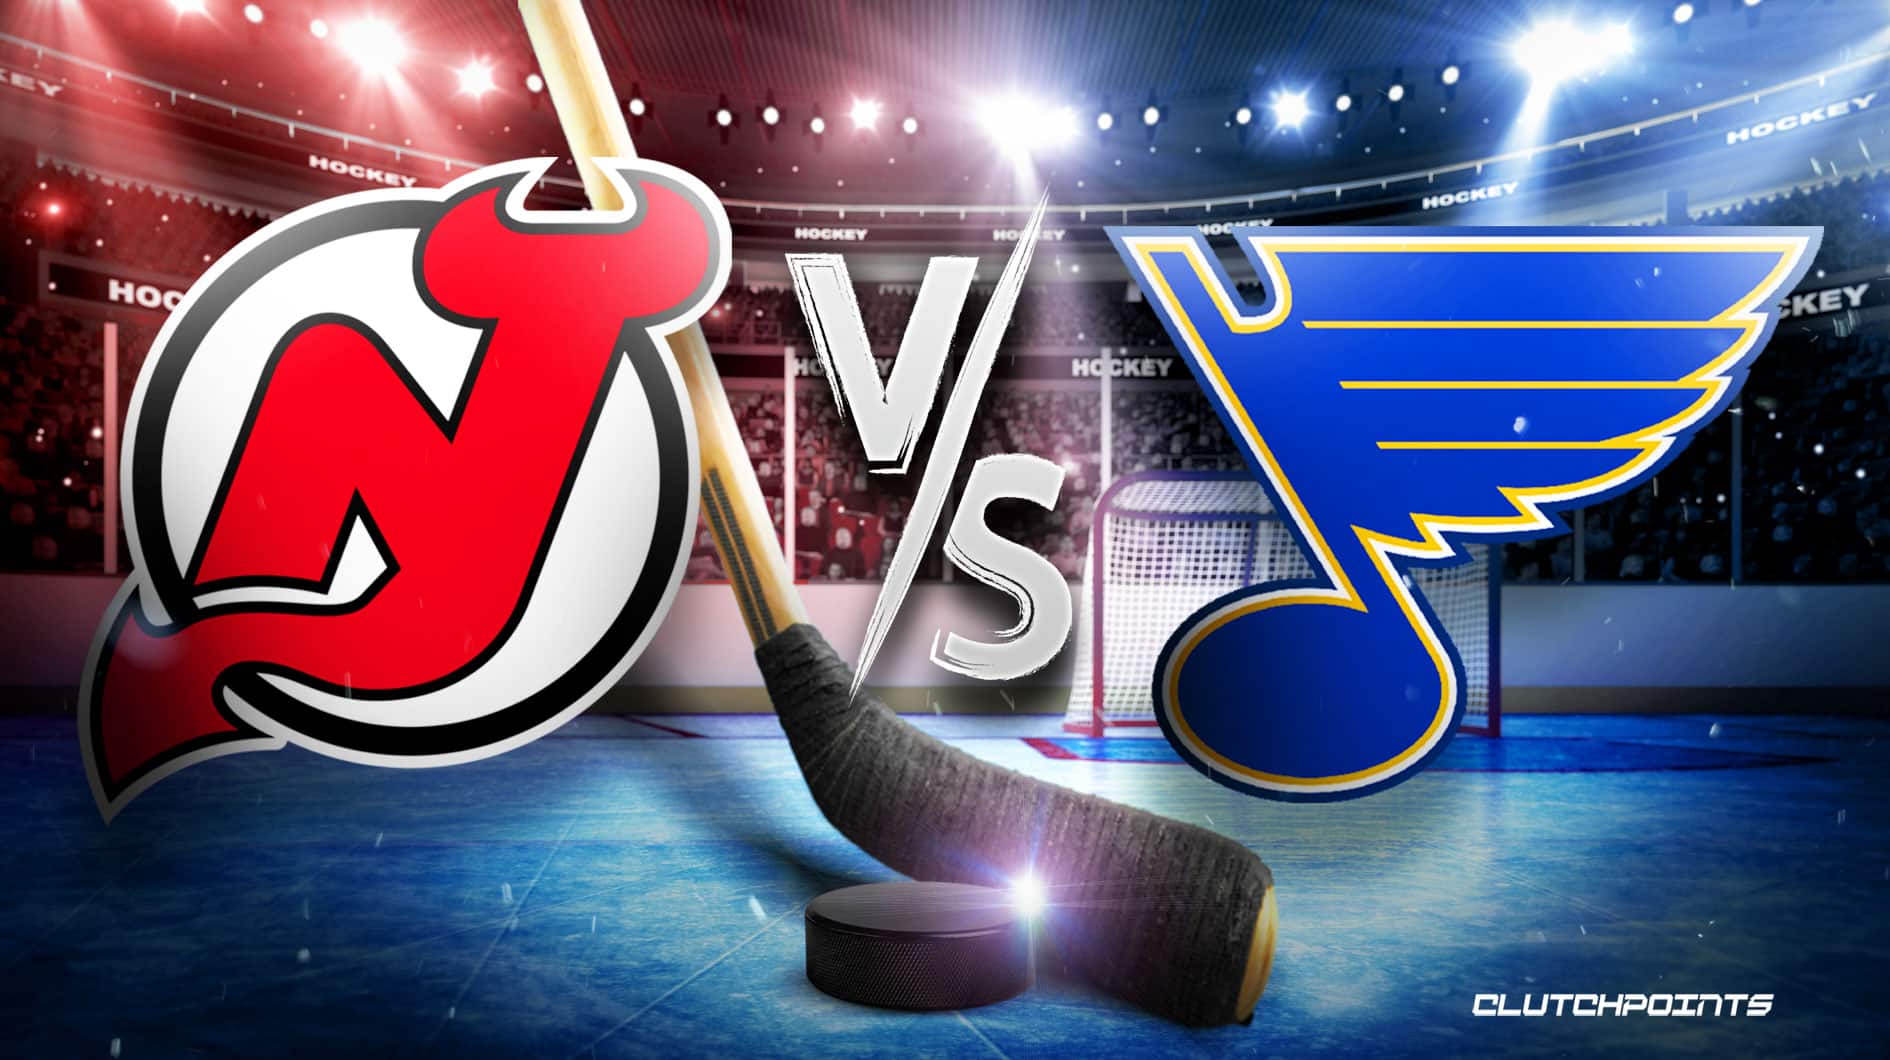 St. Louis Blues at Columbus Blue Jackets odds, picks and predictions